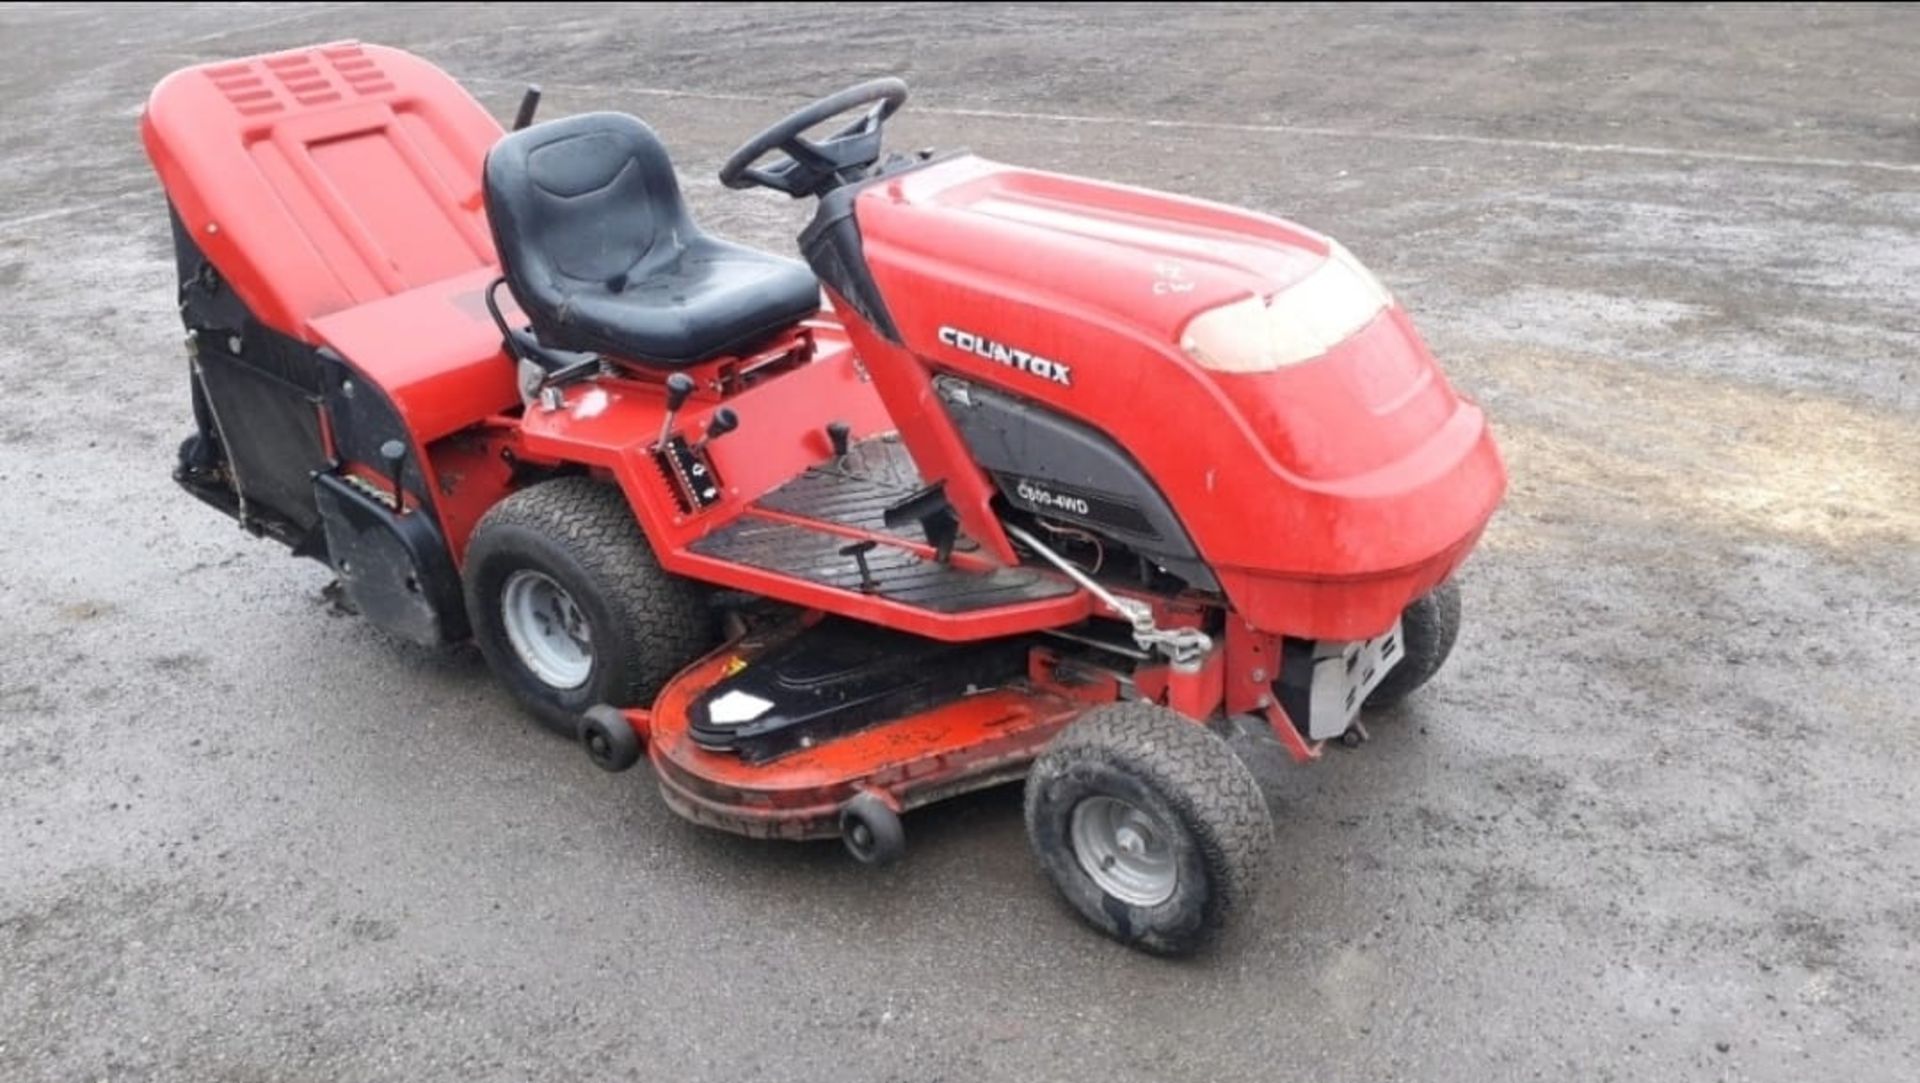 COUNTAX C800H PETROL RIDE ON MOWER, FULL WORKING ORDER WITH SWEEPER AND GRASS BOX *NO VAT* - Image 4 of 8